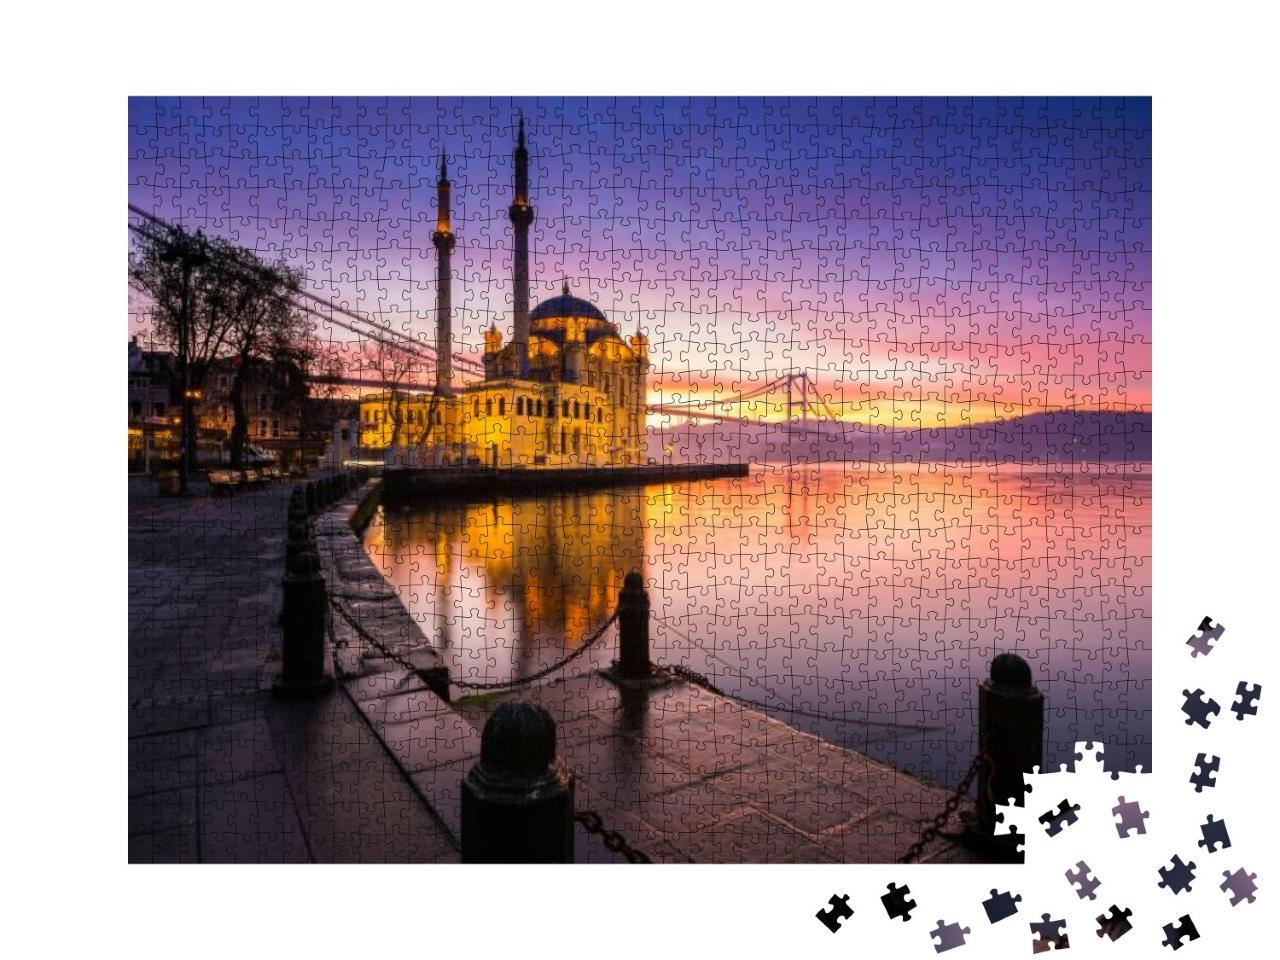 Amazing Sunrise At Ortakoy Mosque in Istanbul, Turkey... Jigsaw Puzzle with 1000 pieces